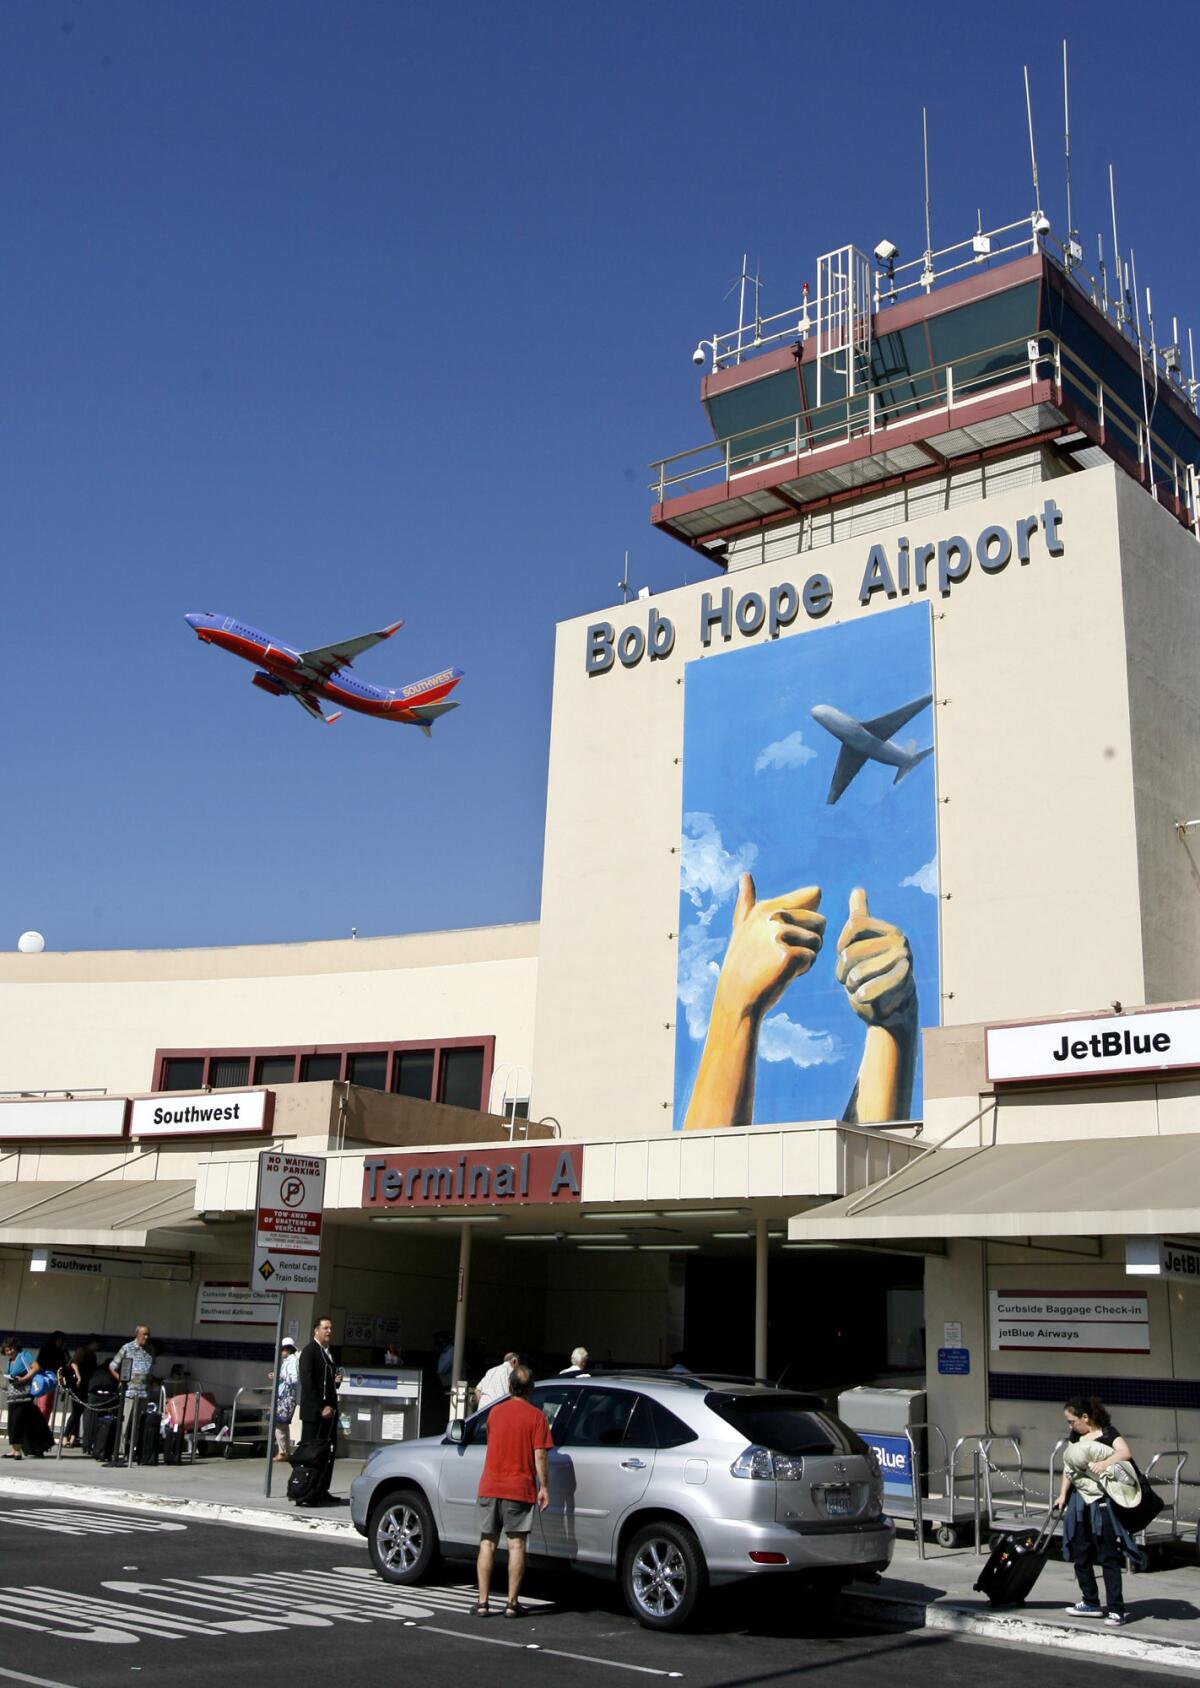 An airplane takes off from Bob Hope Airport, where new art created by a student is being displayed at the airport's main entryway, on Tuesday, October 2, 2012.